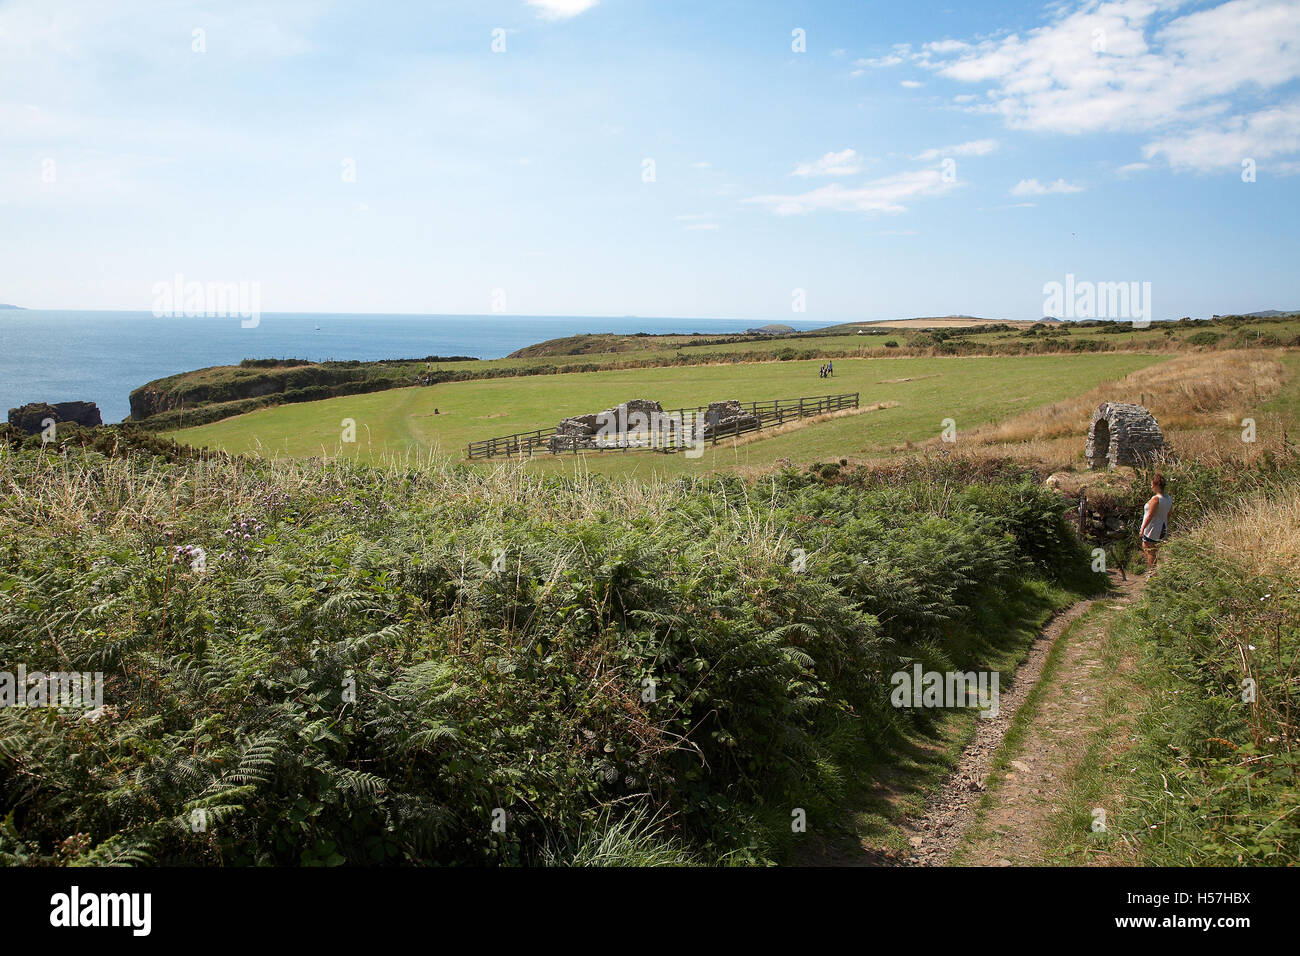 St Nons Chapel in a field on the Pembrokeshire coastal path, between St Davids and Solva, West Wales,UK. Stock Photo